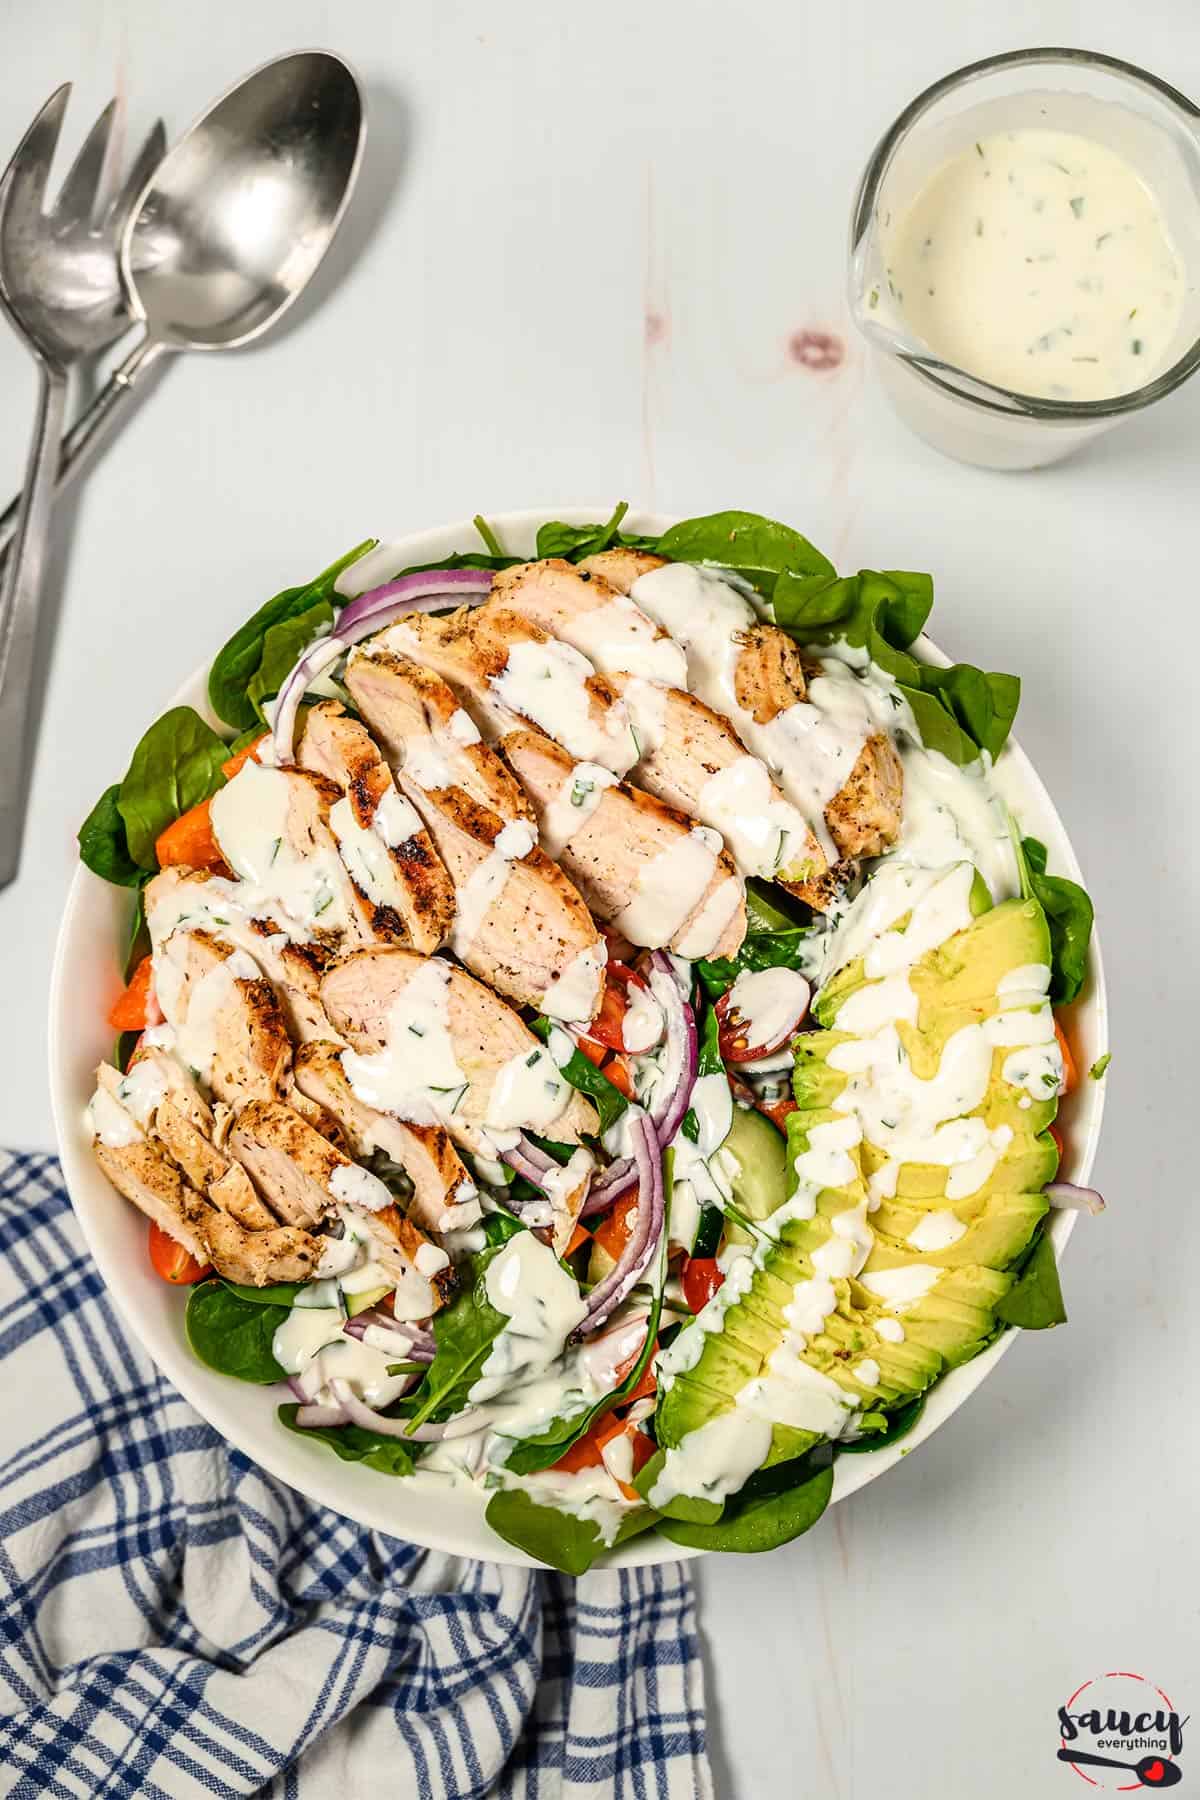 Grilled chicken salad topped with buttermilk ranch dressing